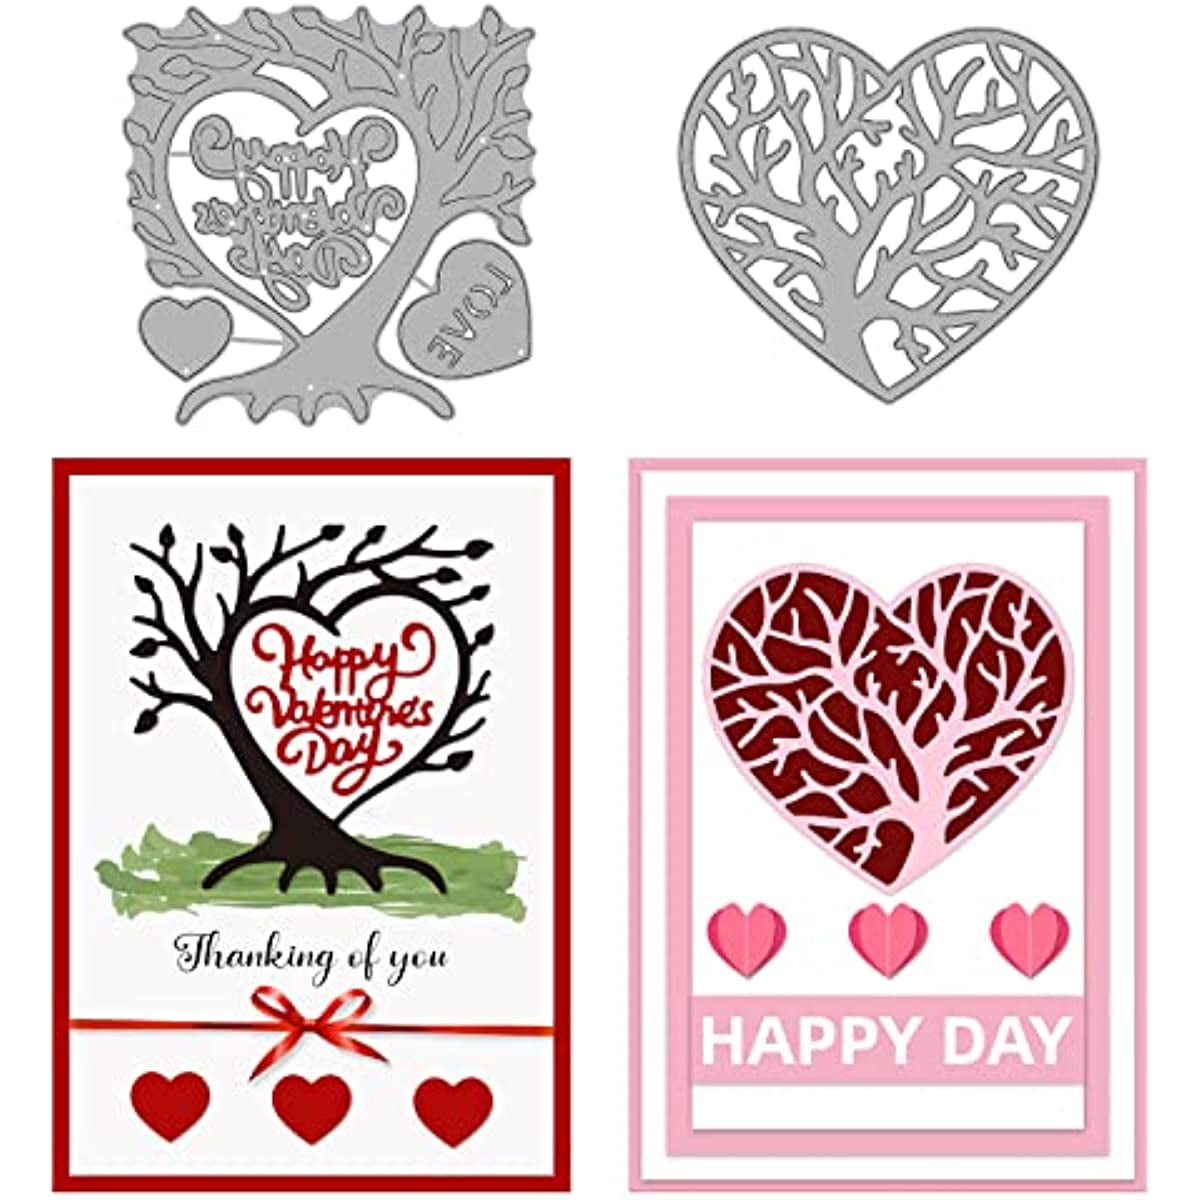  Valentines Day Heart Flowers Metal Cutting Dies Stencil DIY  Scrapbooking Album Paper Card Template Mold Embossing Craft Decoration  Scrapbooking Die Cuts Clearance